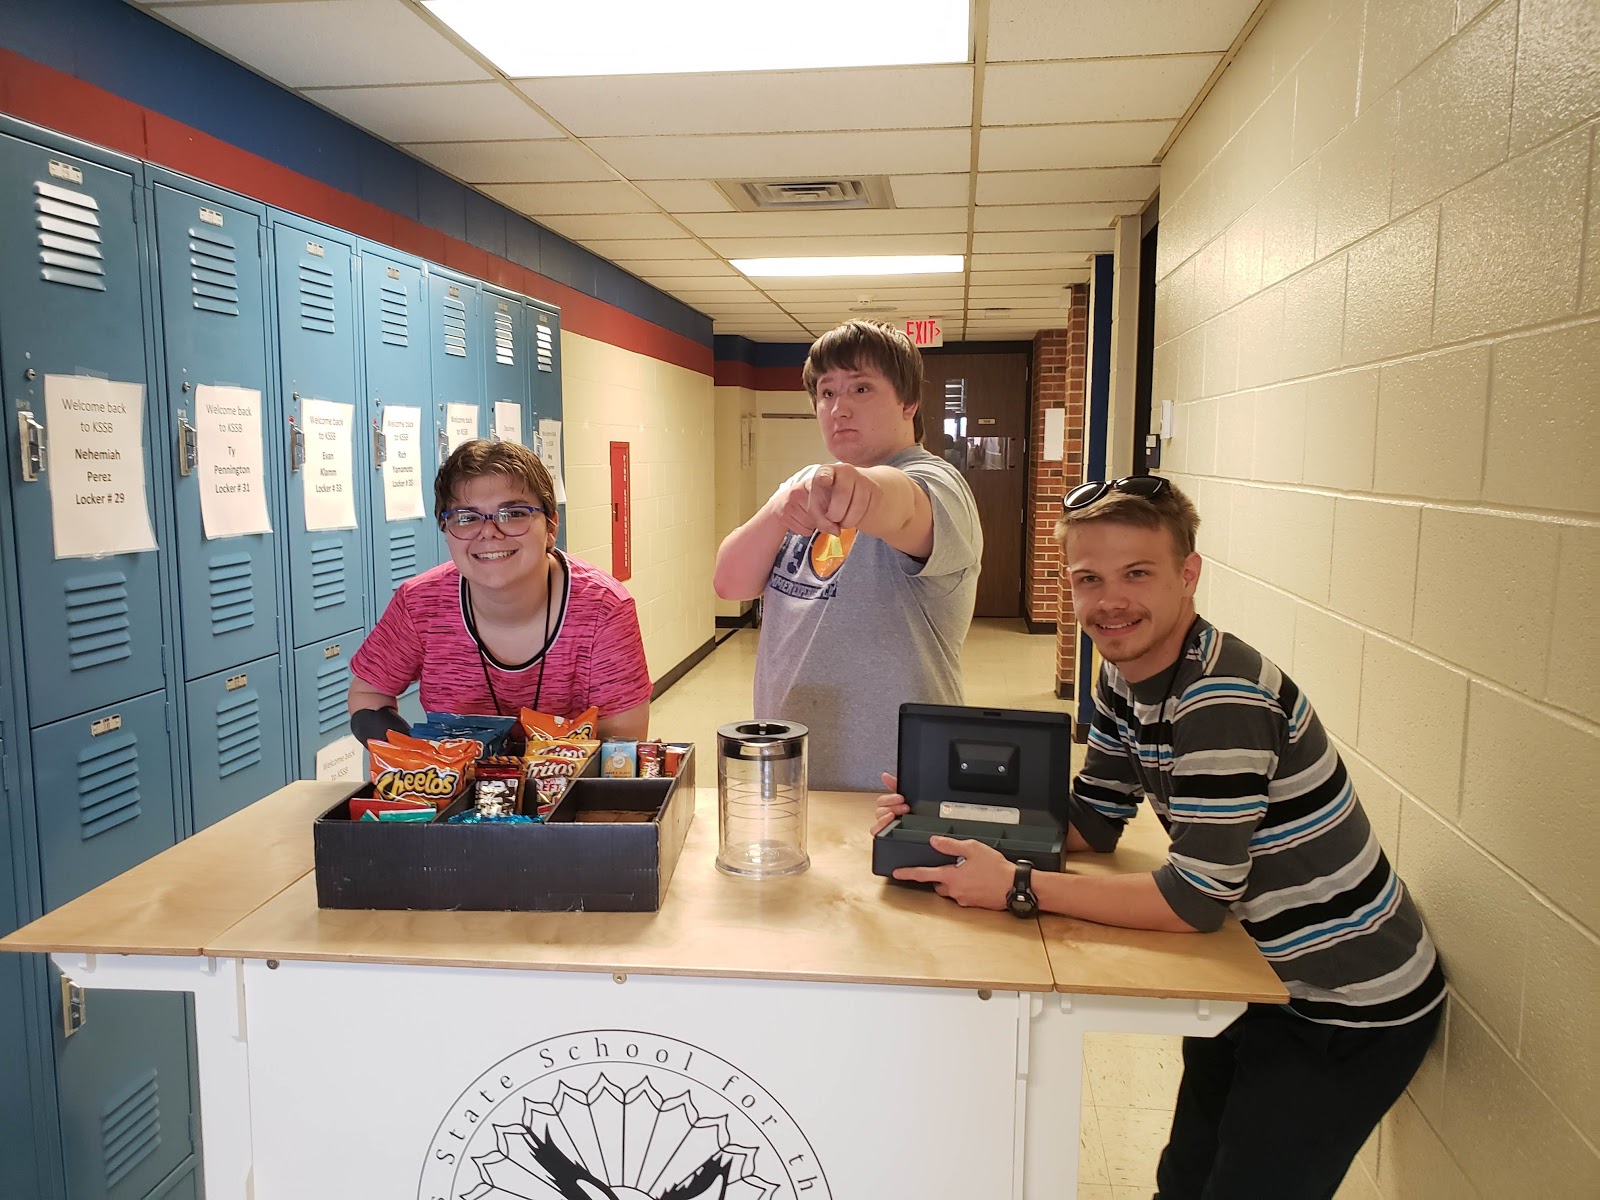 3 students standing at the Coffee Cart - one on the left, leaning over the snack basket. A second student behind the cart pointing at the camera. A third student with elbows on cart holding the cash box.